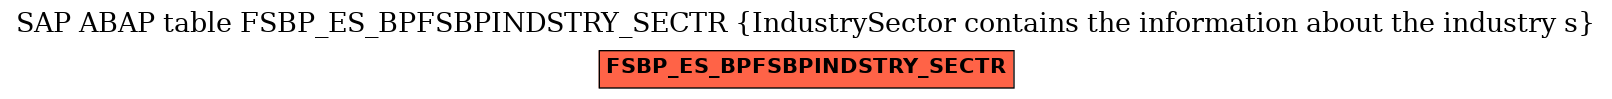 E-R Diagram for table FSBP_ES_BPFSBPINDSTRY_SECTR (IndustrySector contains the information about the industry s)